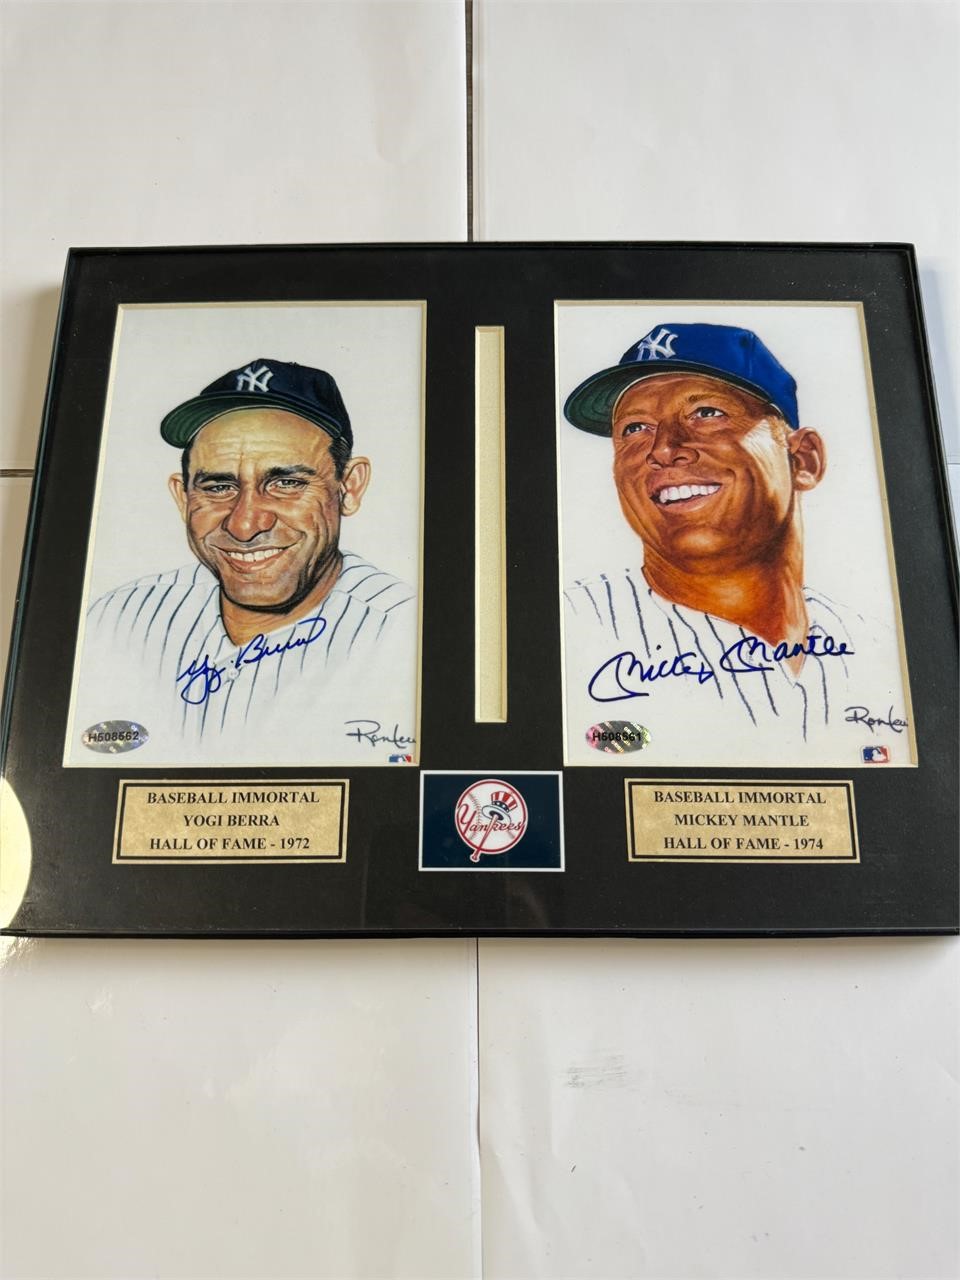 Mickey Mantle Holy Grail Autograph Auction